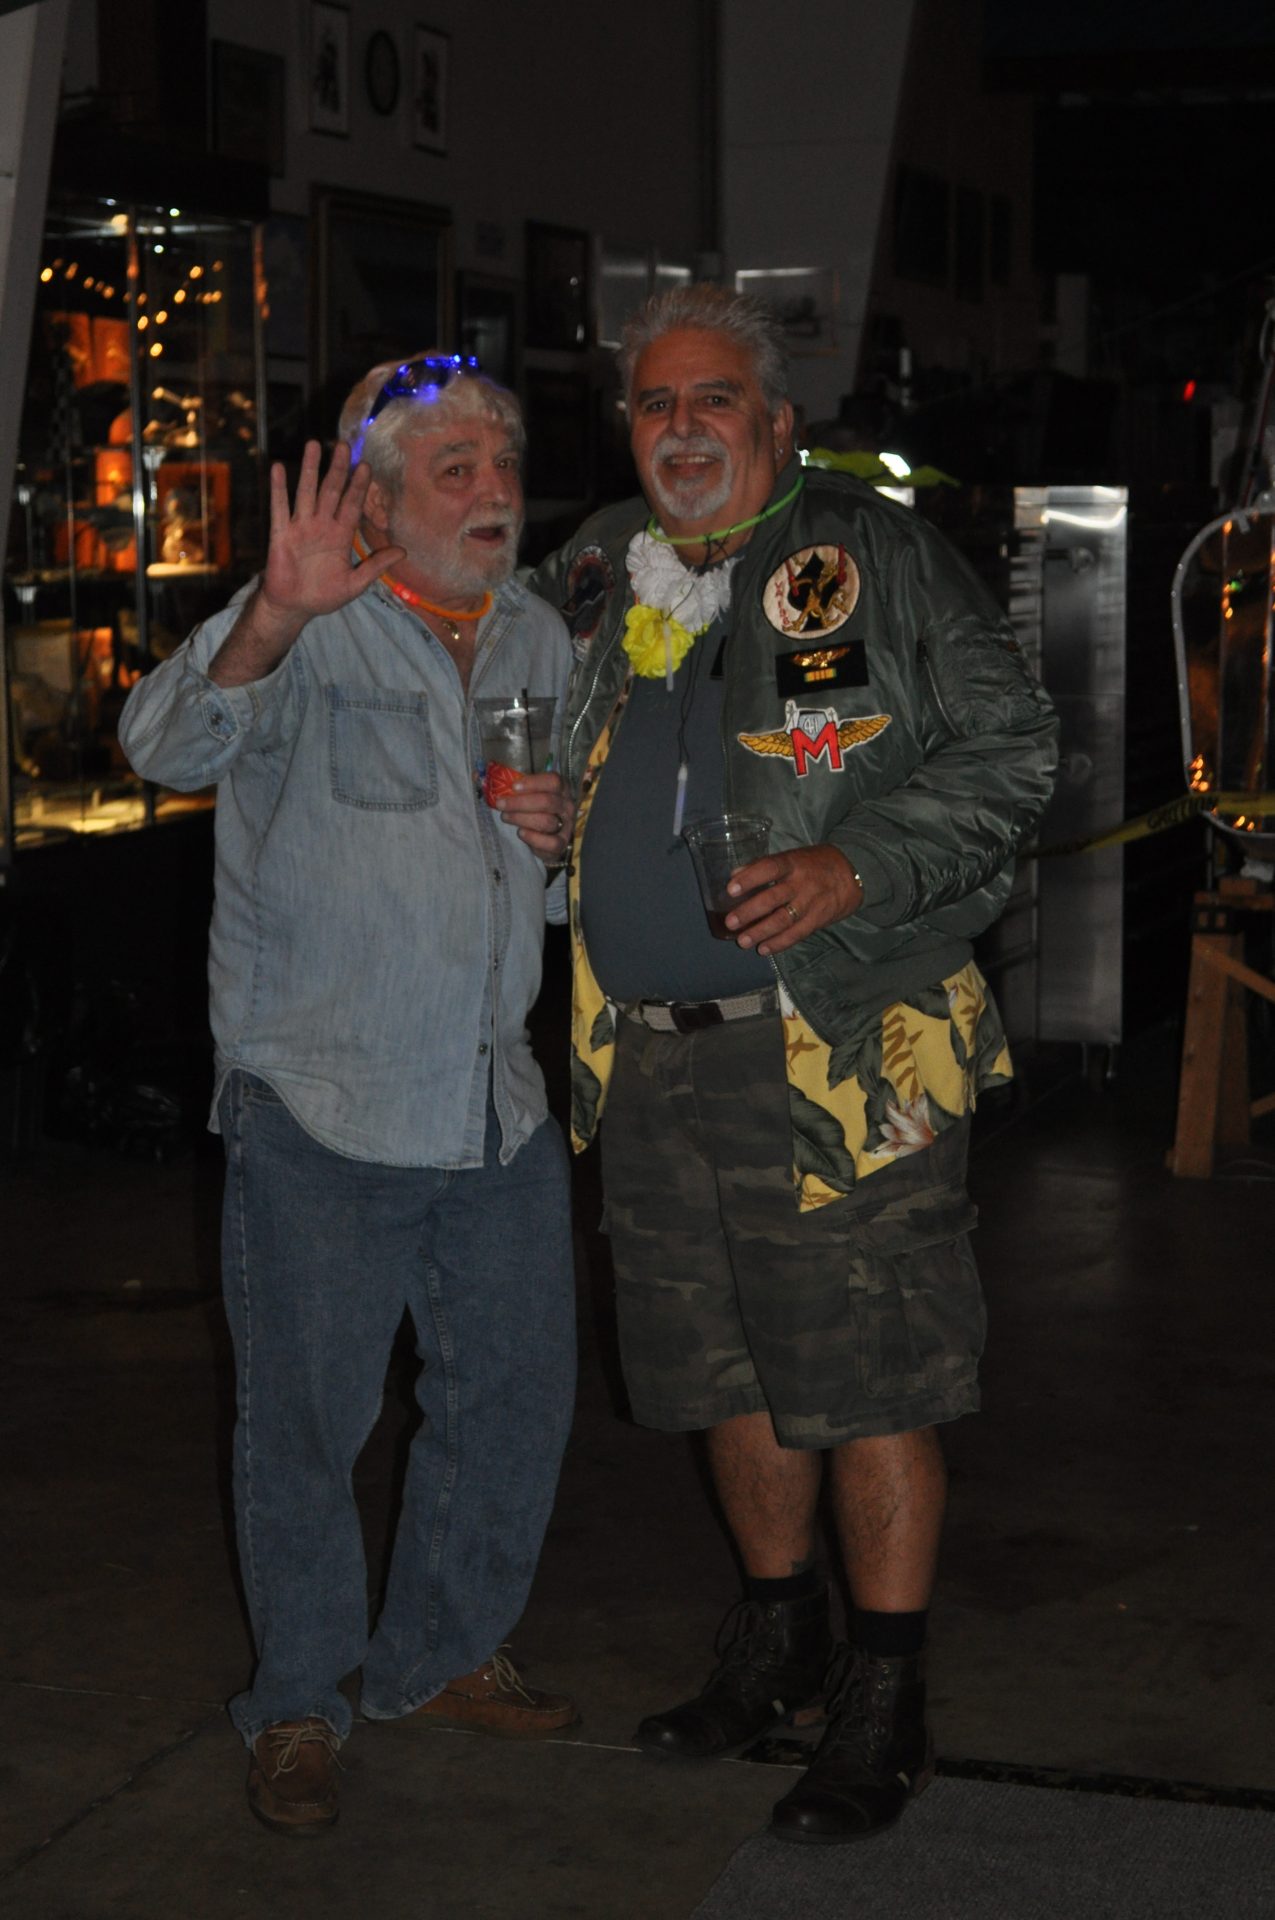 Holding court with Barnacle Bill at the MASH Hangar party clearly trying to convince someone he didn’t do it!